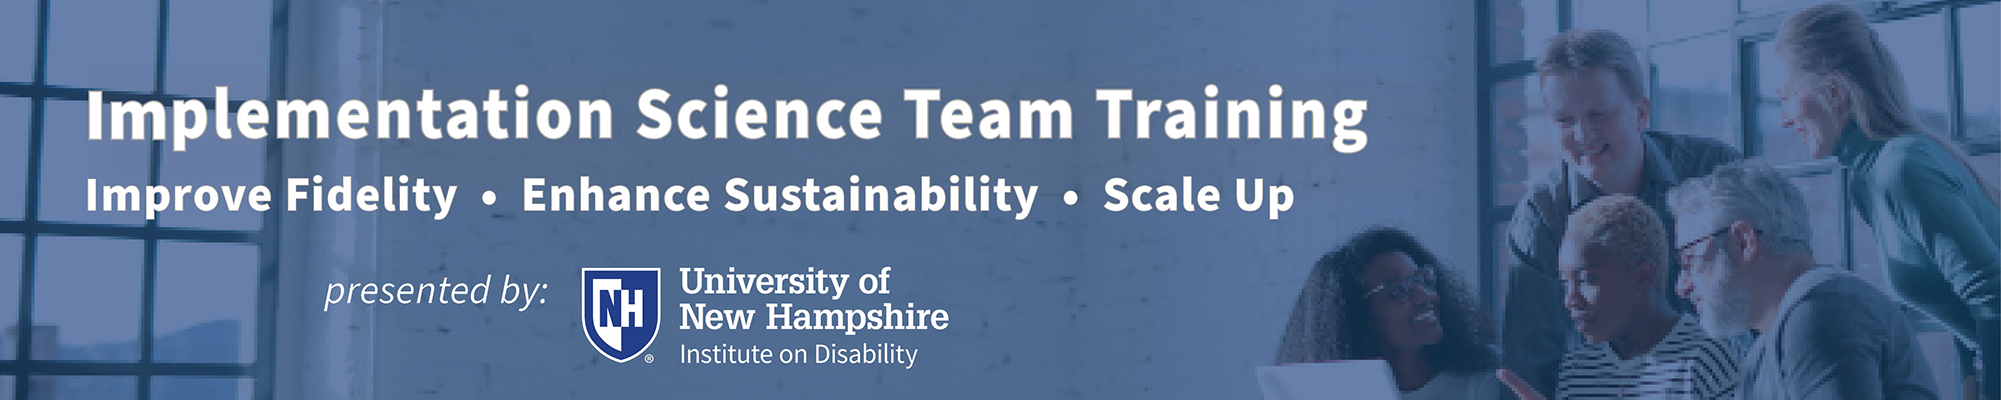 Implementation Science Team Training presented by UNH Institute on Disability